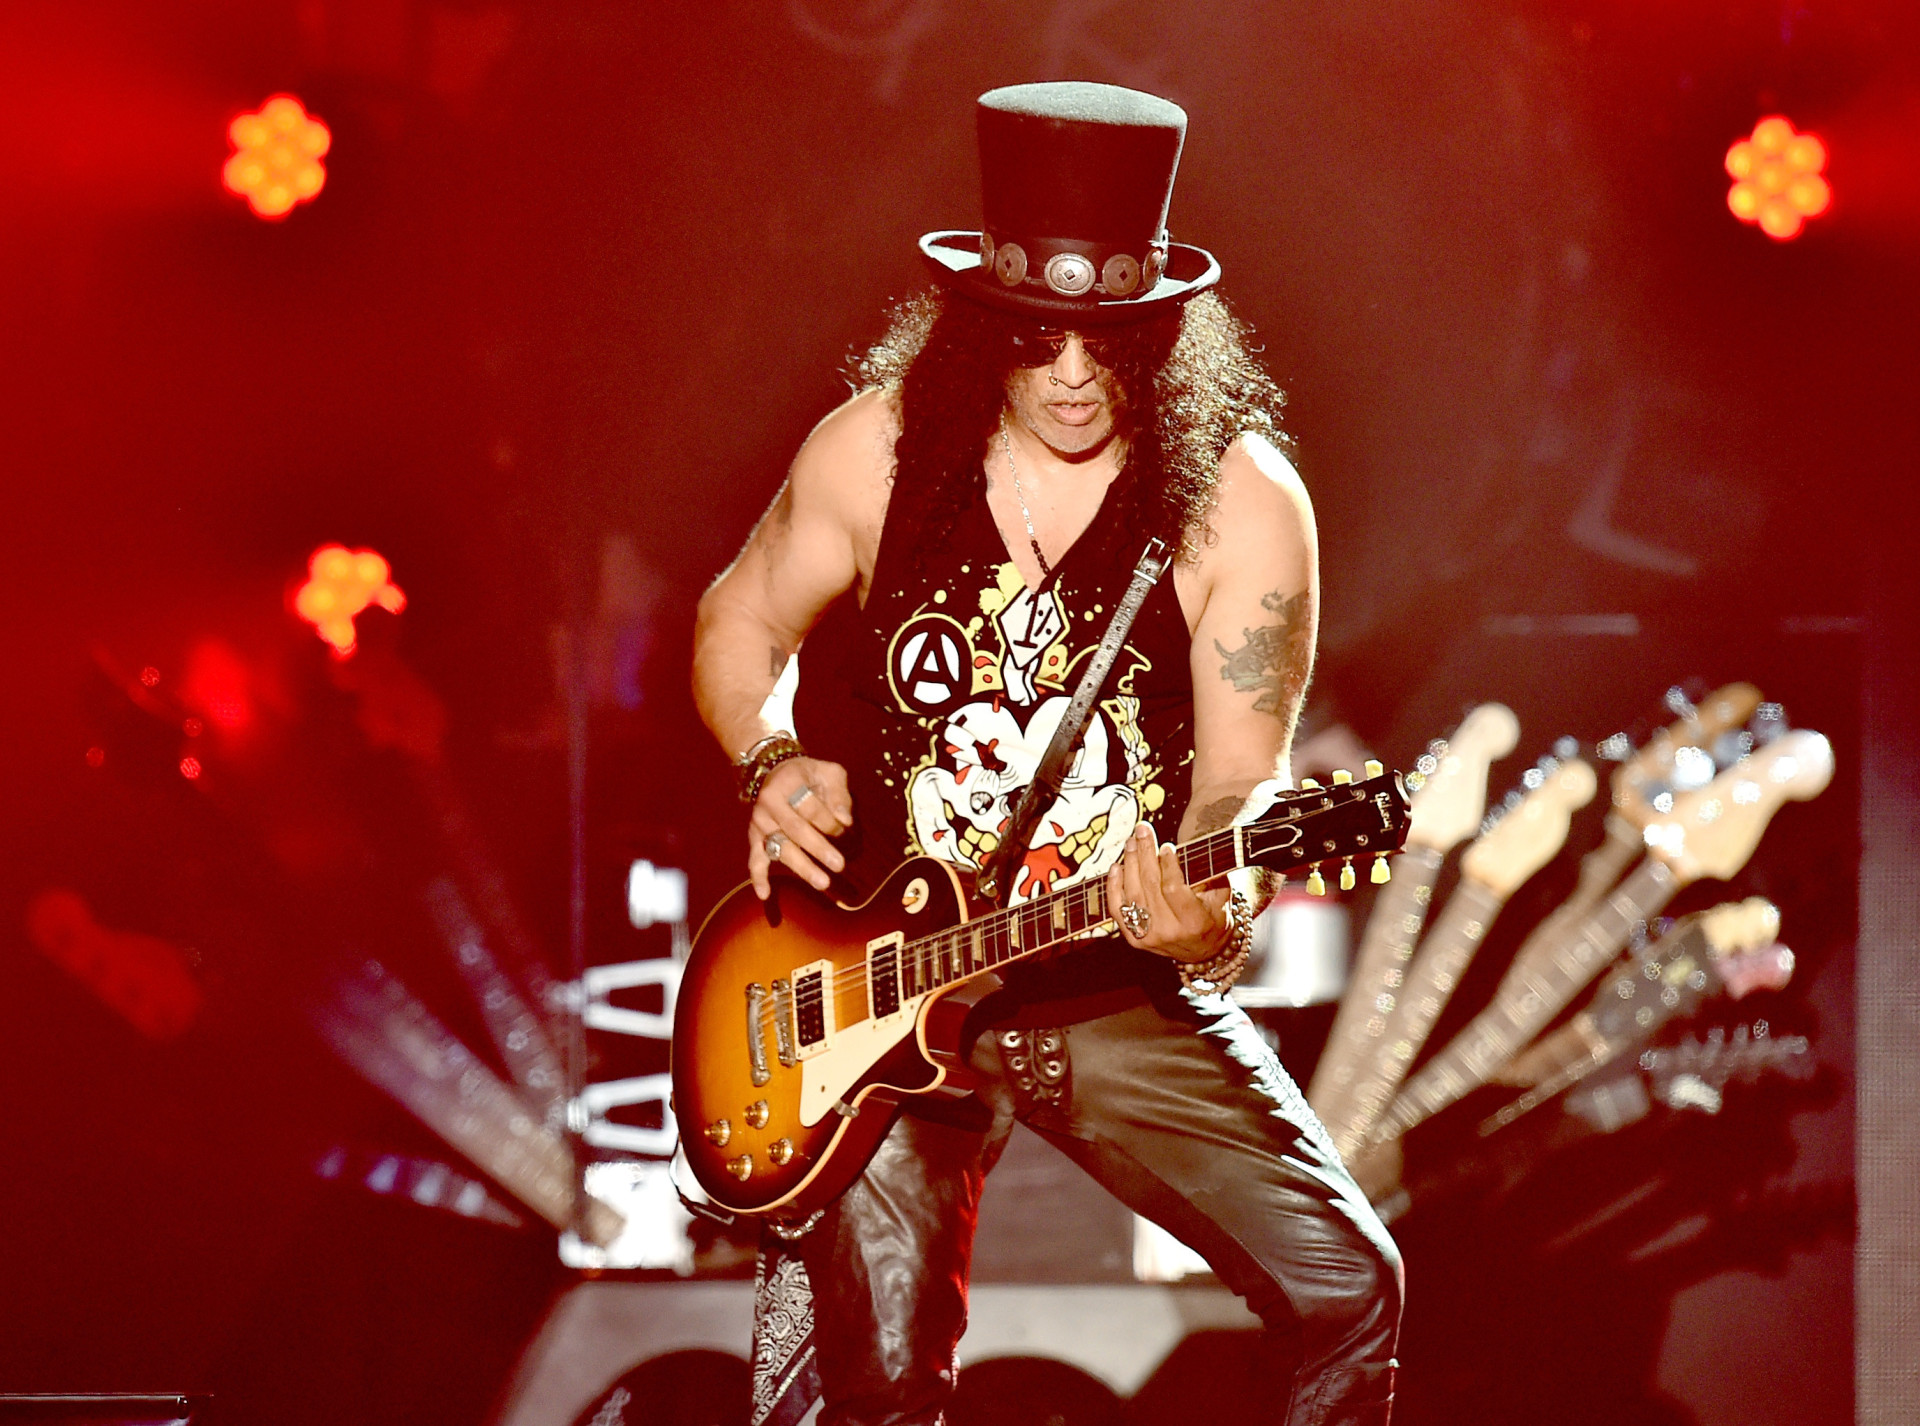 <p>The Slash costume has remained a popular choice for Halloween due to its association with the big hair and top hat look. Pair up with a friend dressed as Axl Rose to rock this iconic duo!</p>